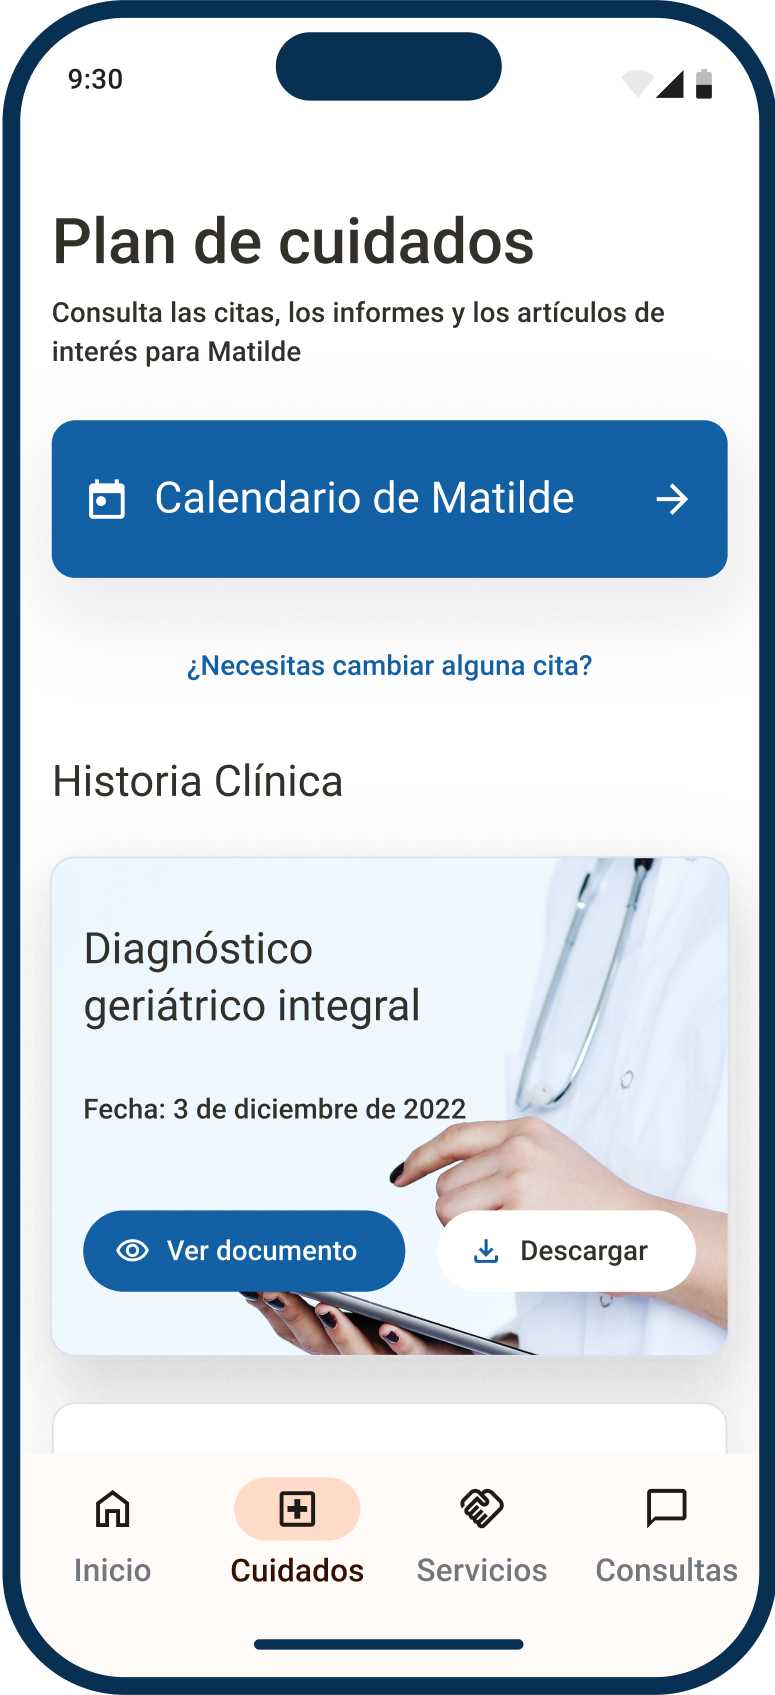 Ubikare app, care plan showing access to clinical history